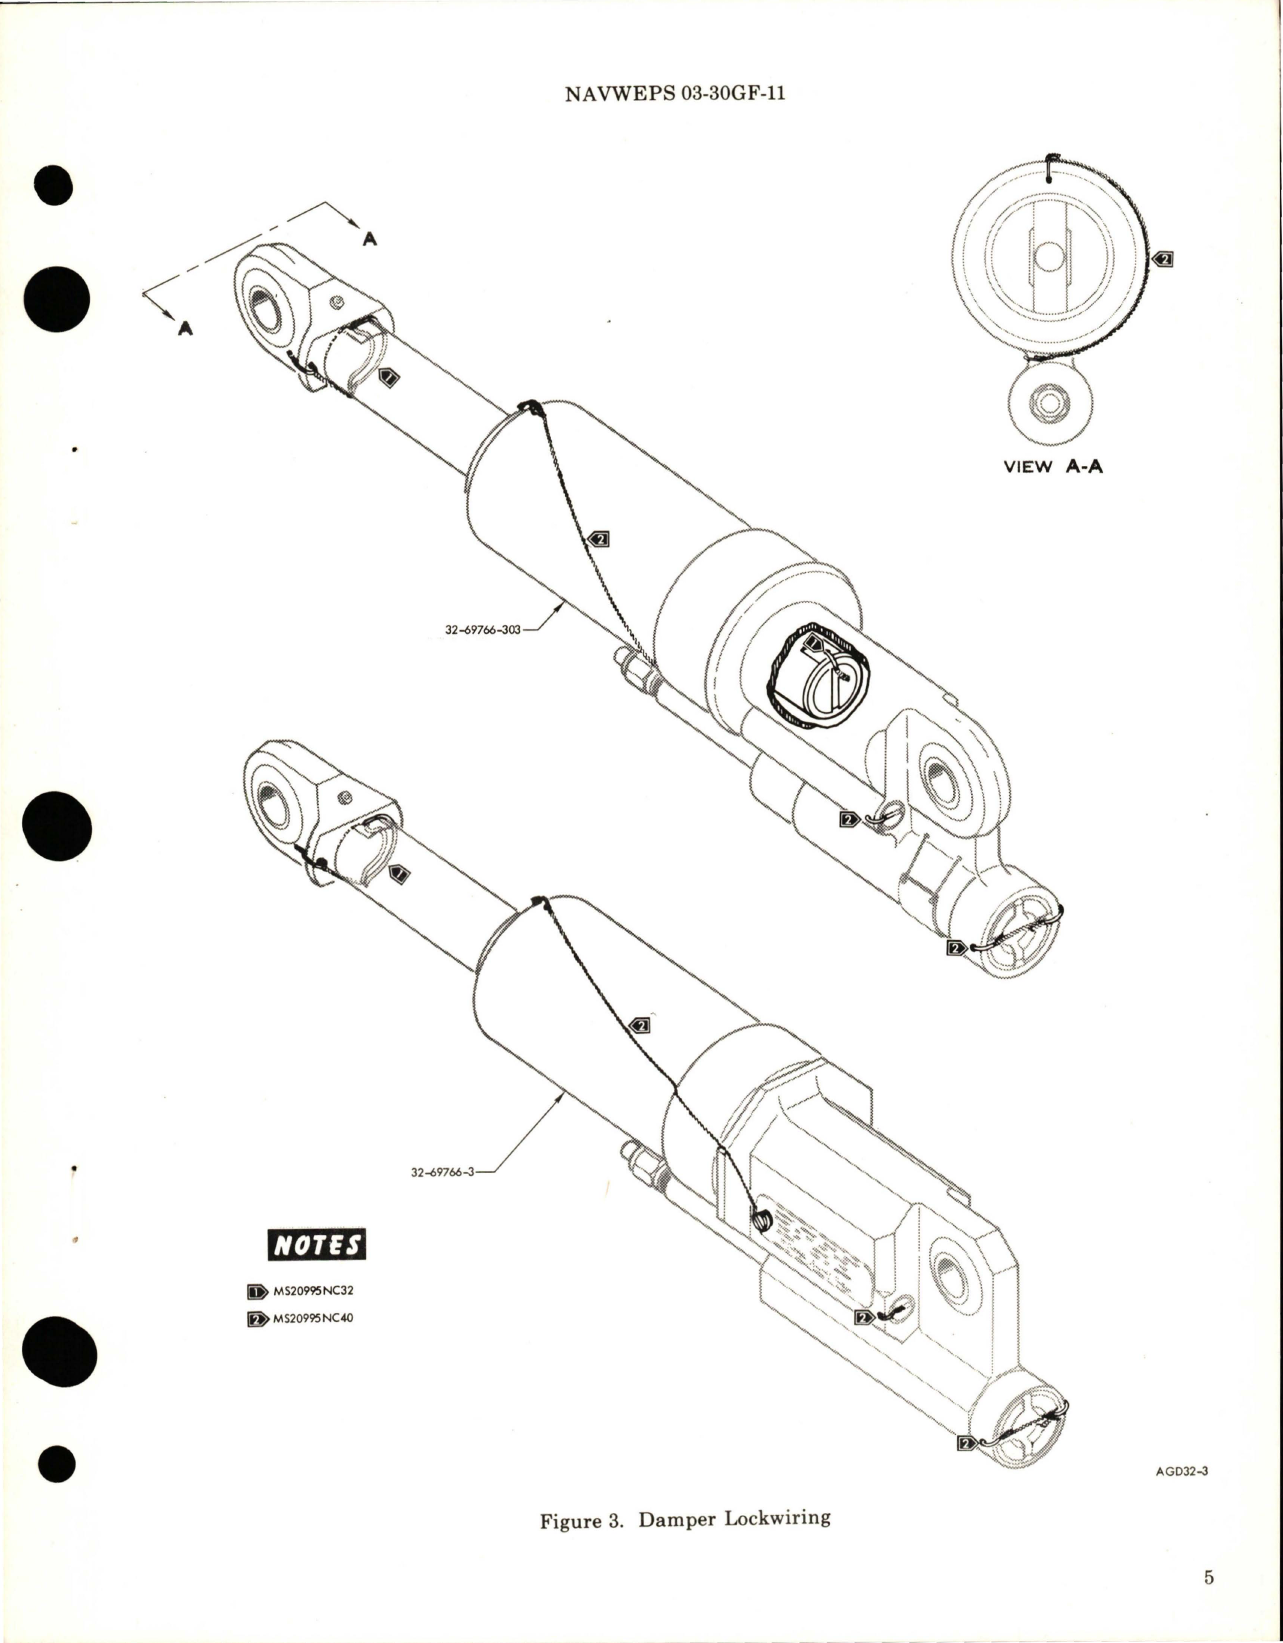 Sample page 5 from AirCorps Library document: Overhaul Instructions with Parts Breakdown for Arresting Gear Horizontal Damper Cylinder - Part 32-69766-3 and 32-69766-301